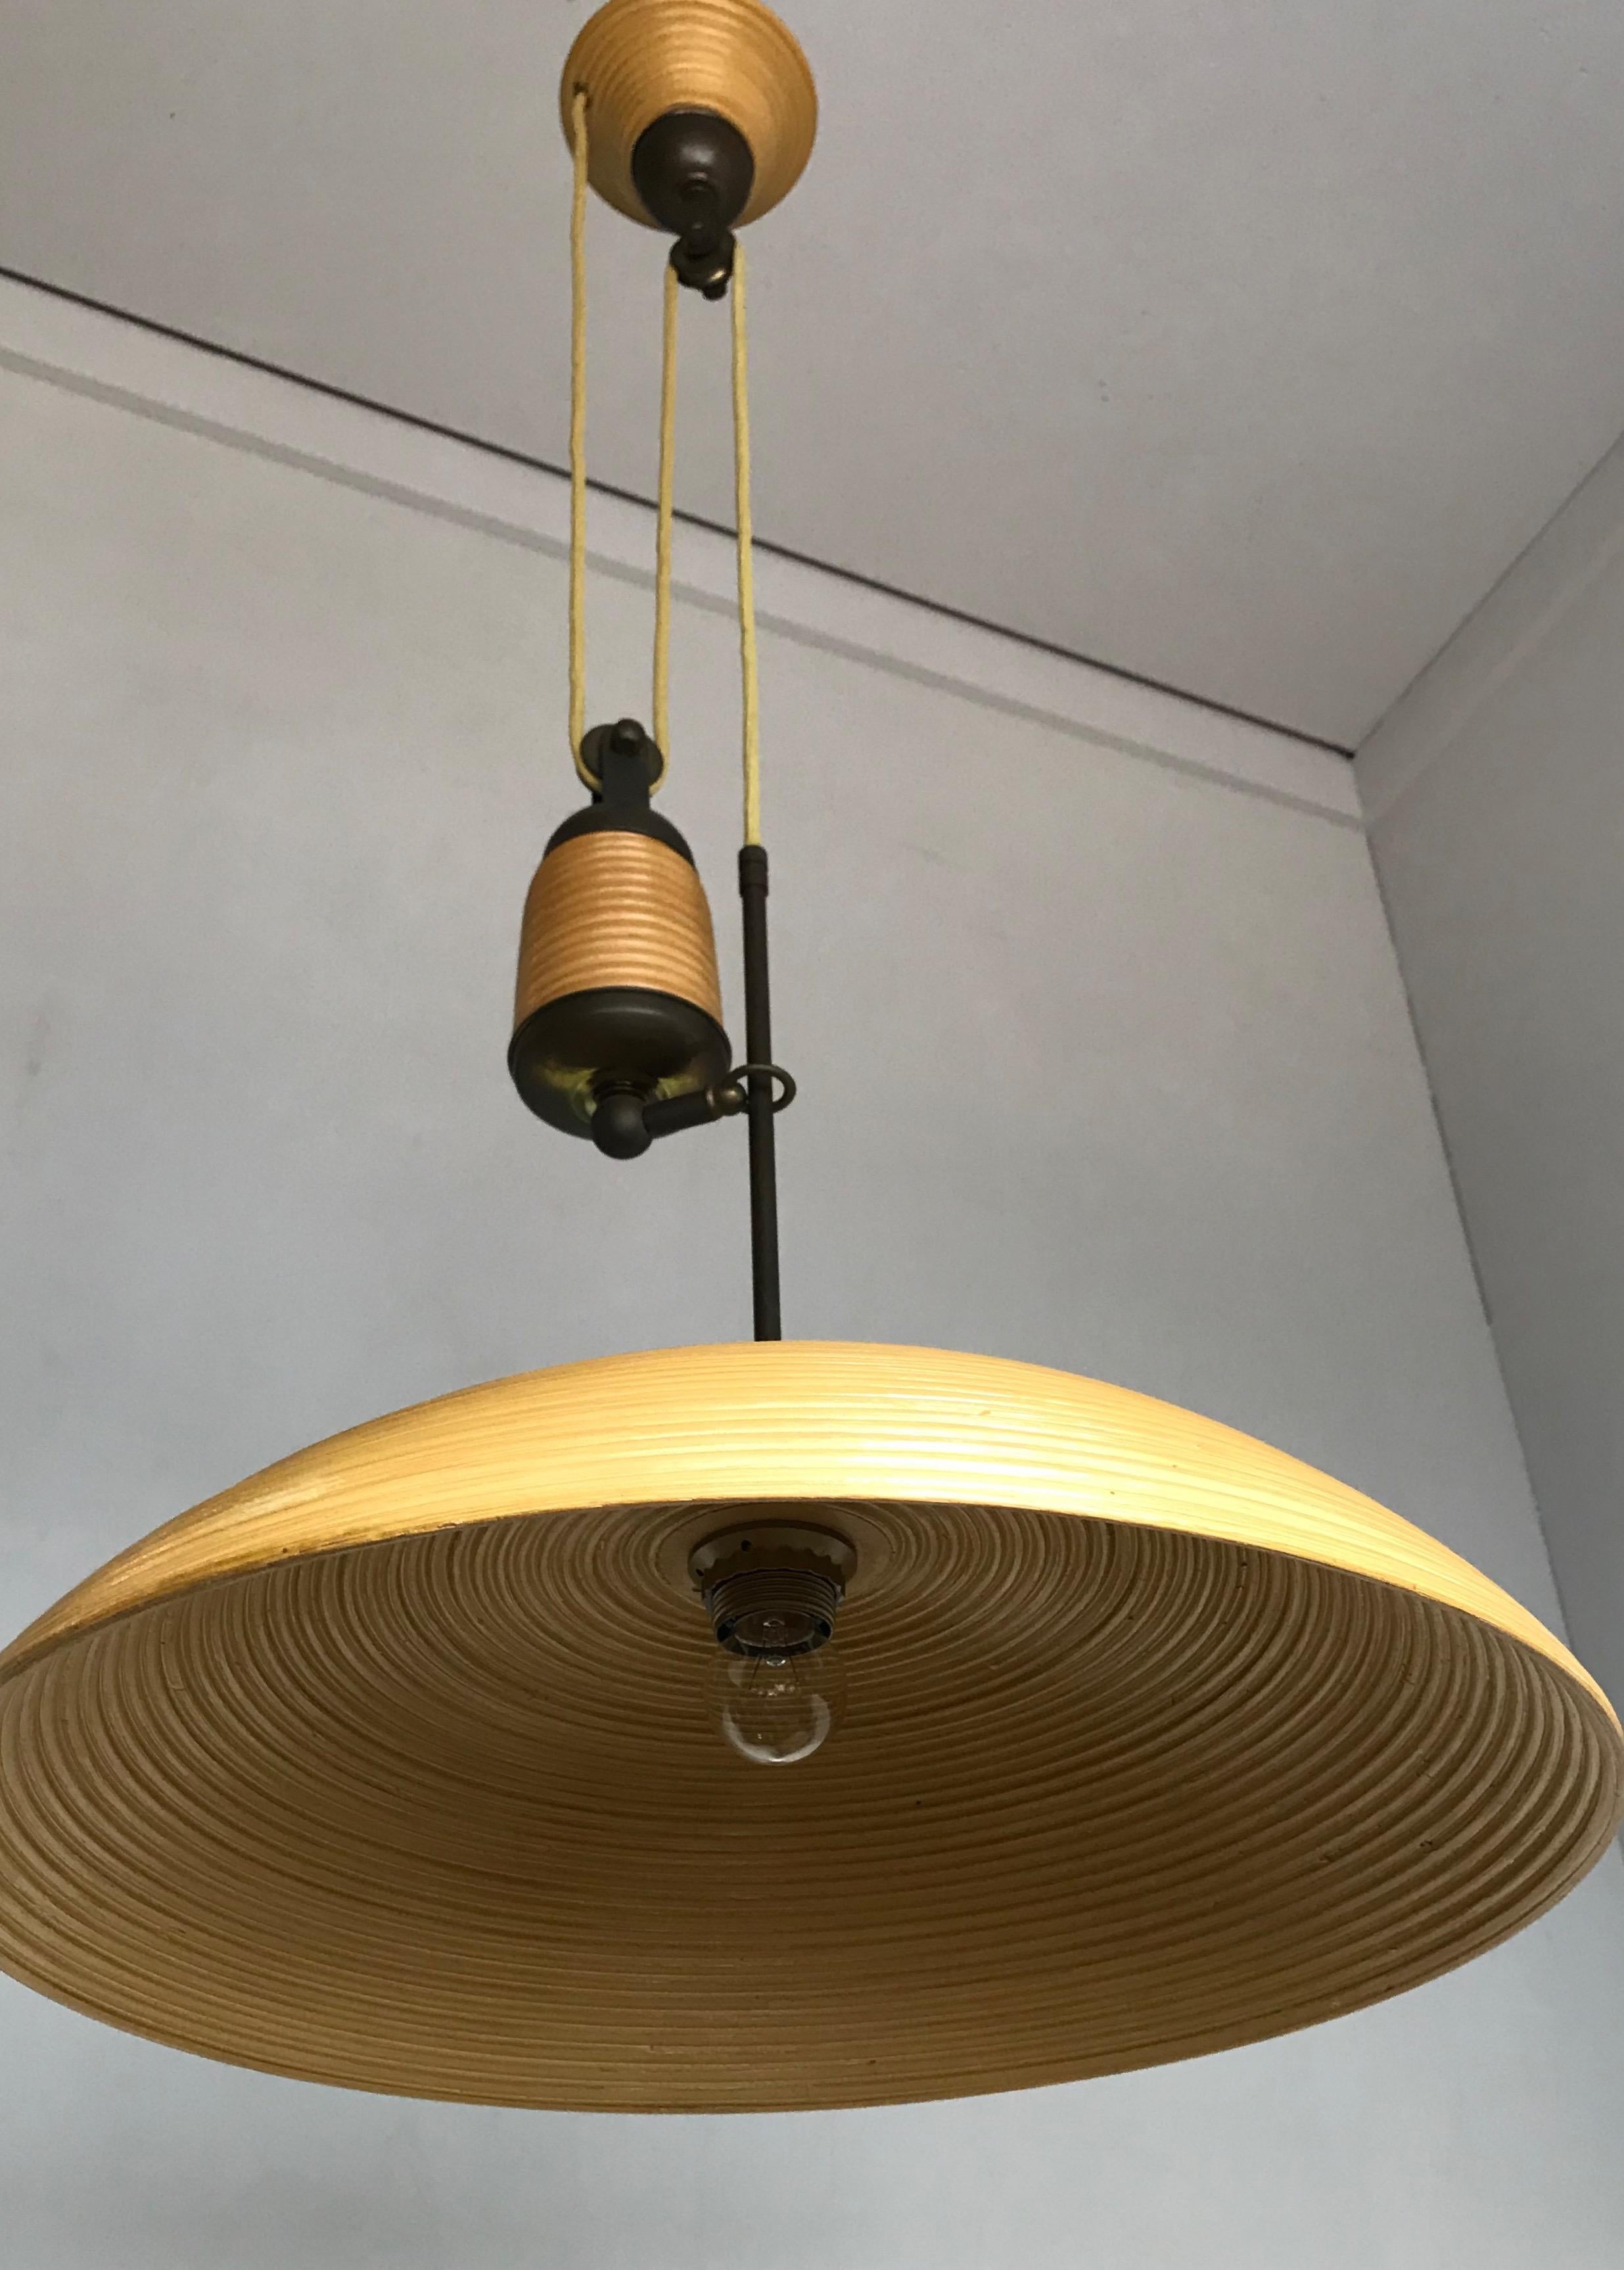 Hand-Crafted Rare and Handcrafted Mid-Century Modern Rattan and Brass Pendant Light, Lamp